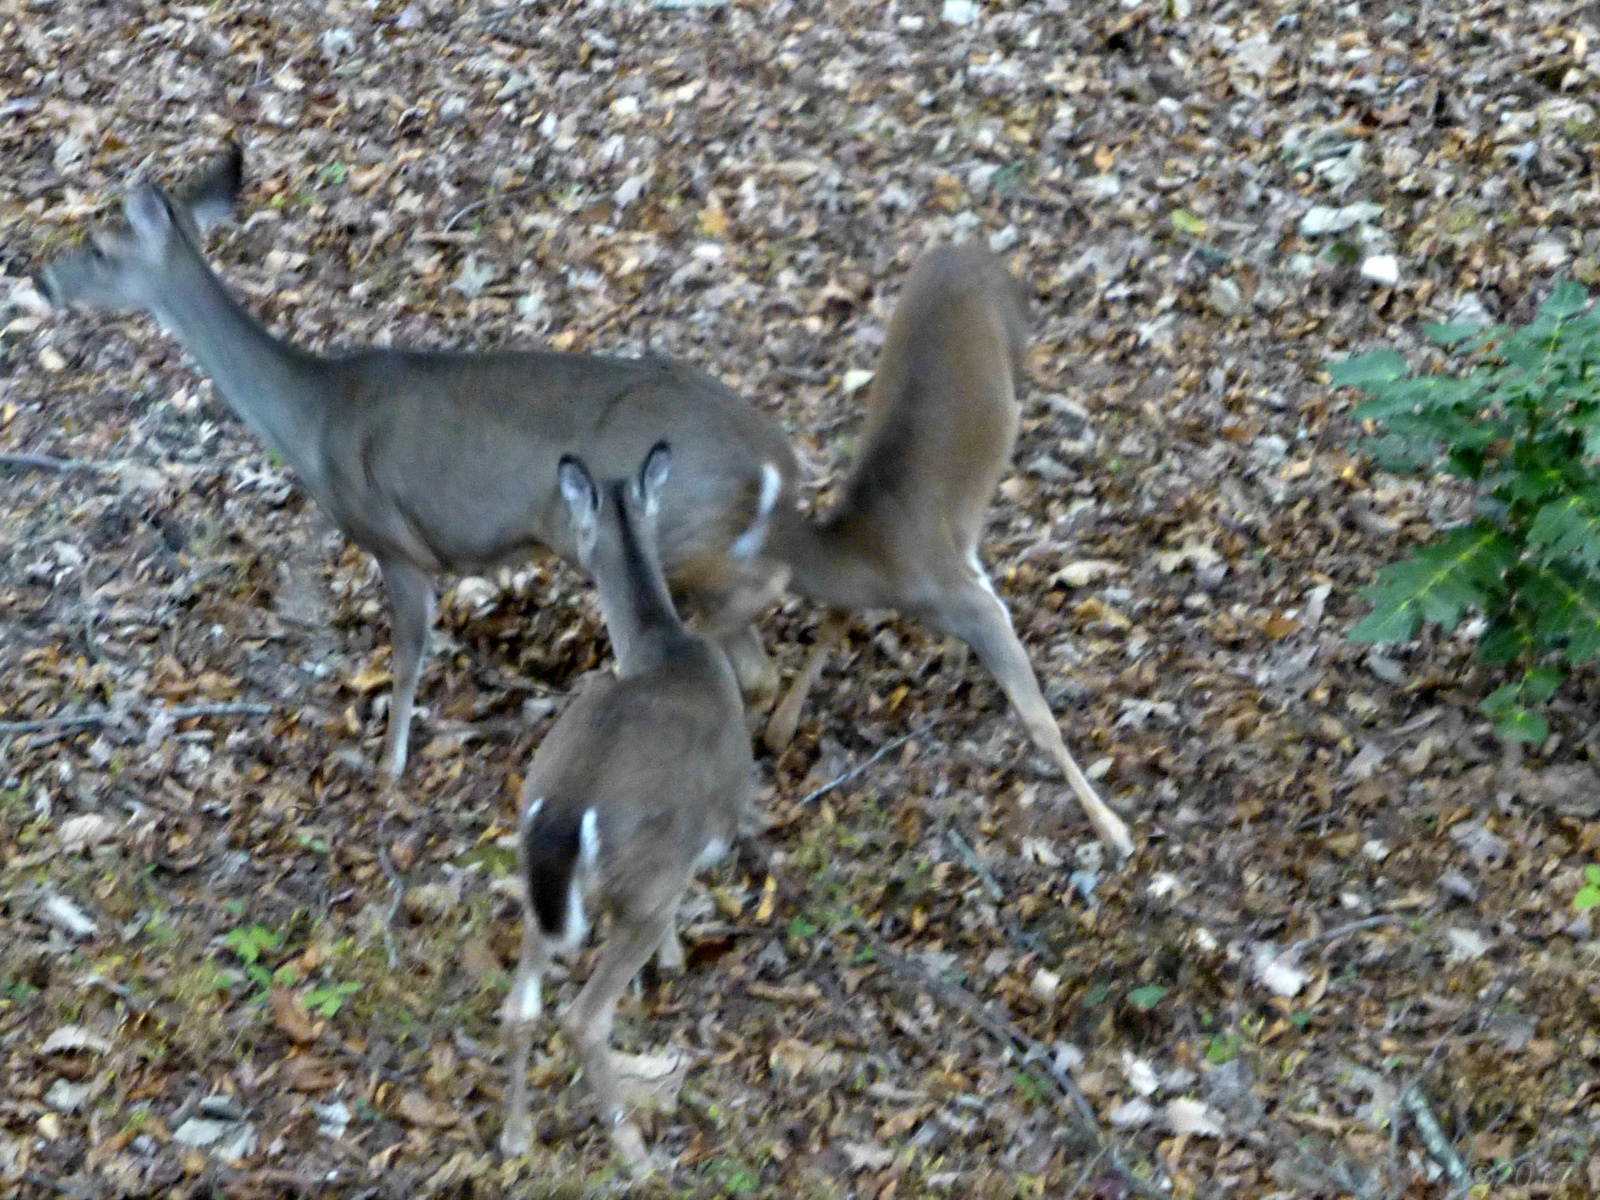 November 4, 2017 - twins rushed the doe at the same time